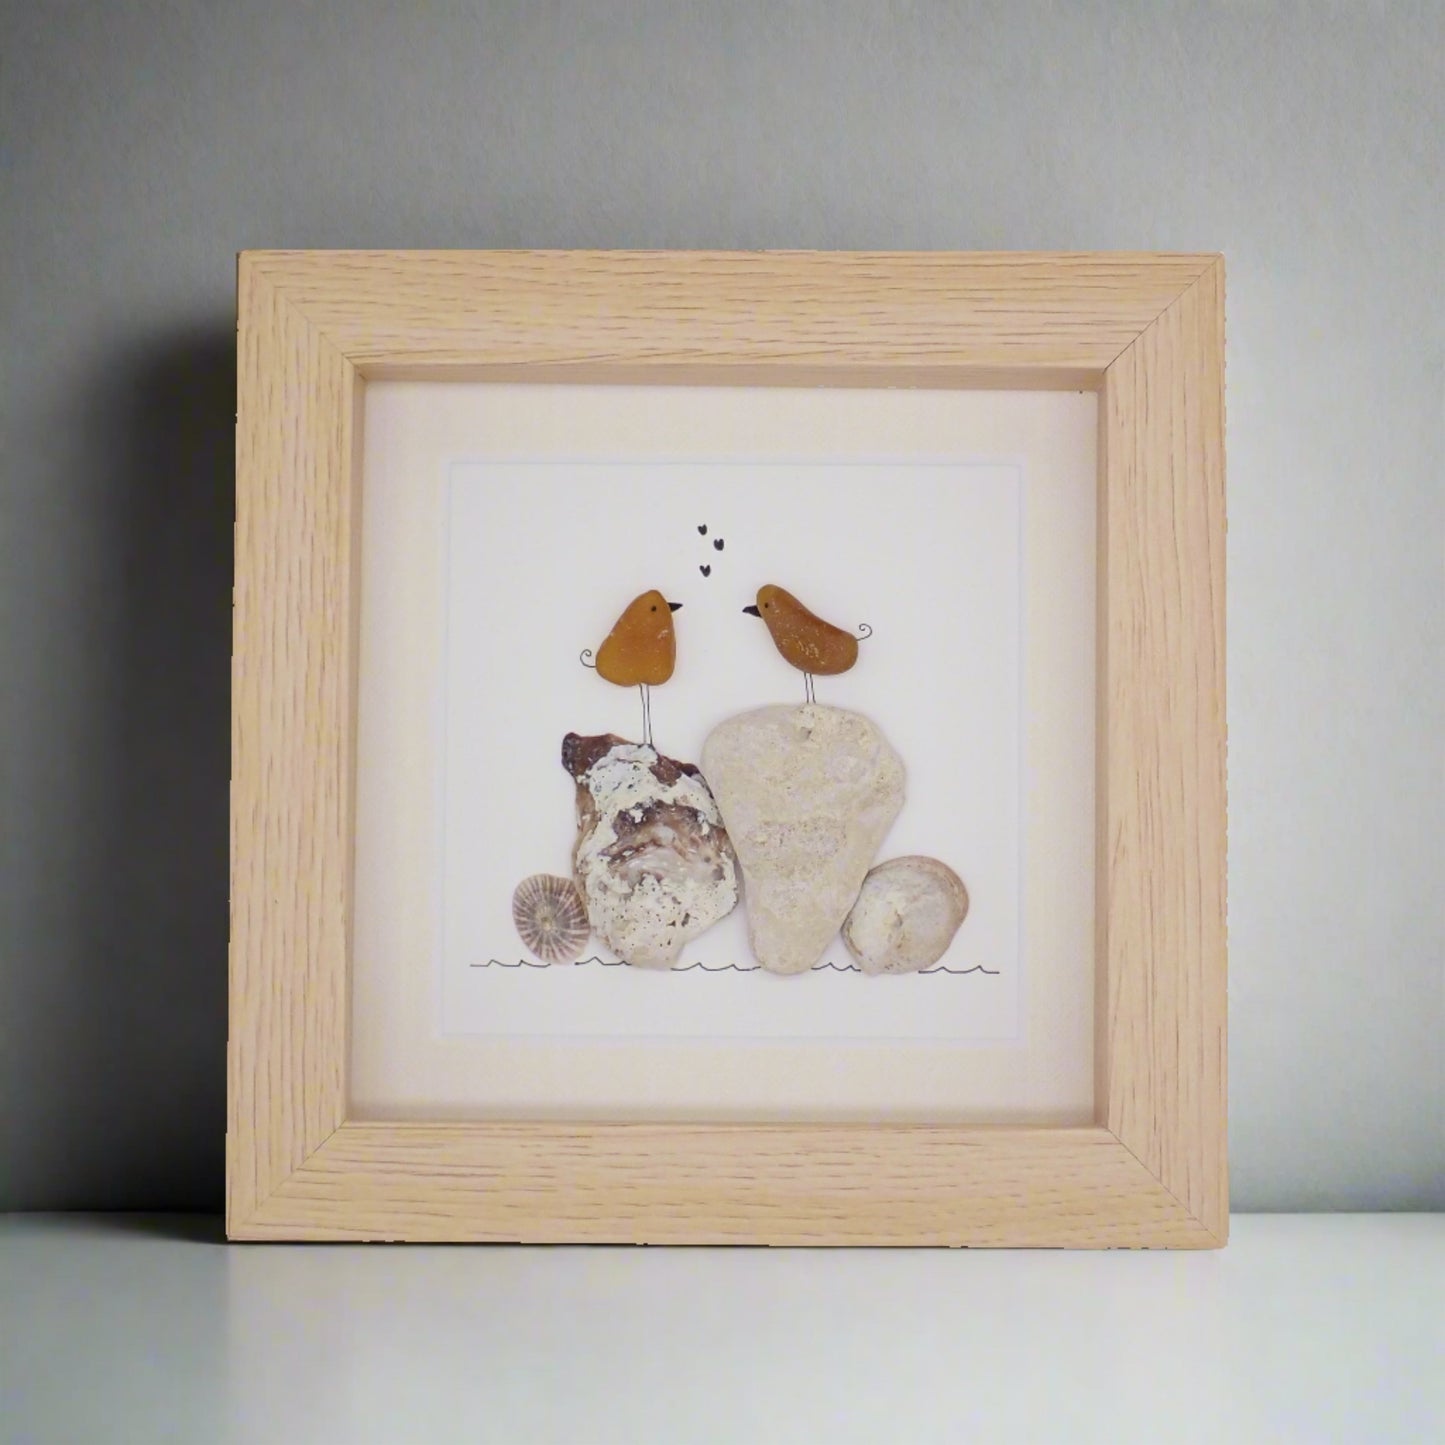 Two Sea Glass Love Birds on Coral and Shells Picture 5x5